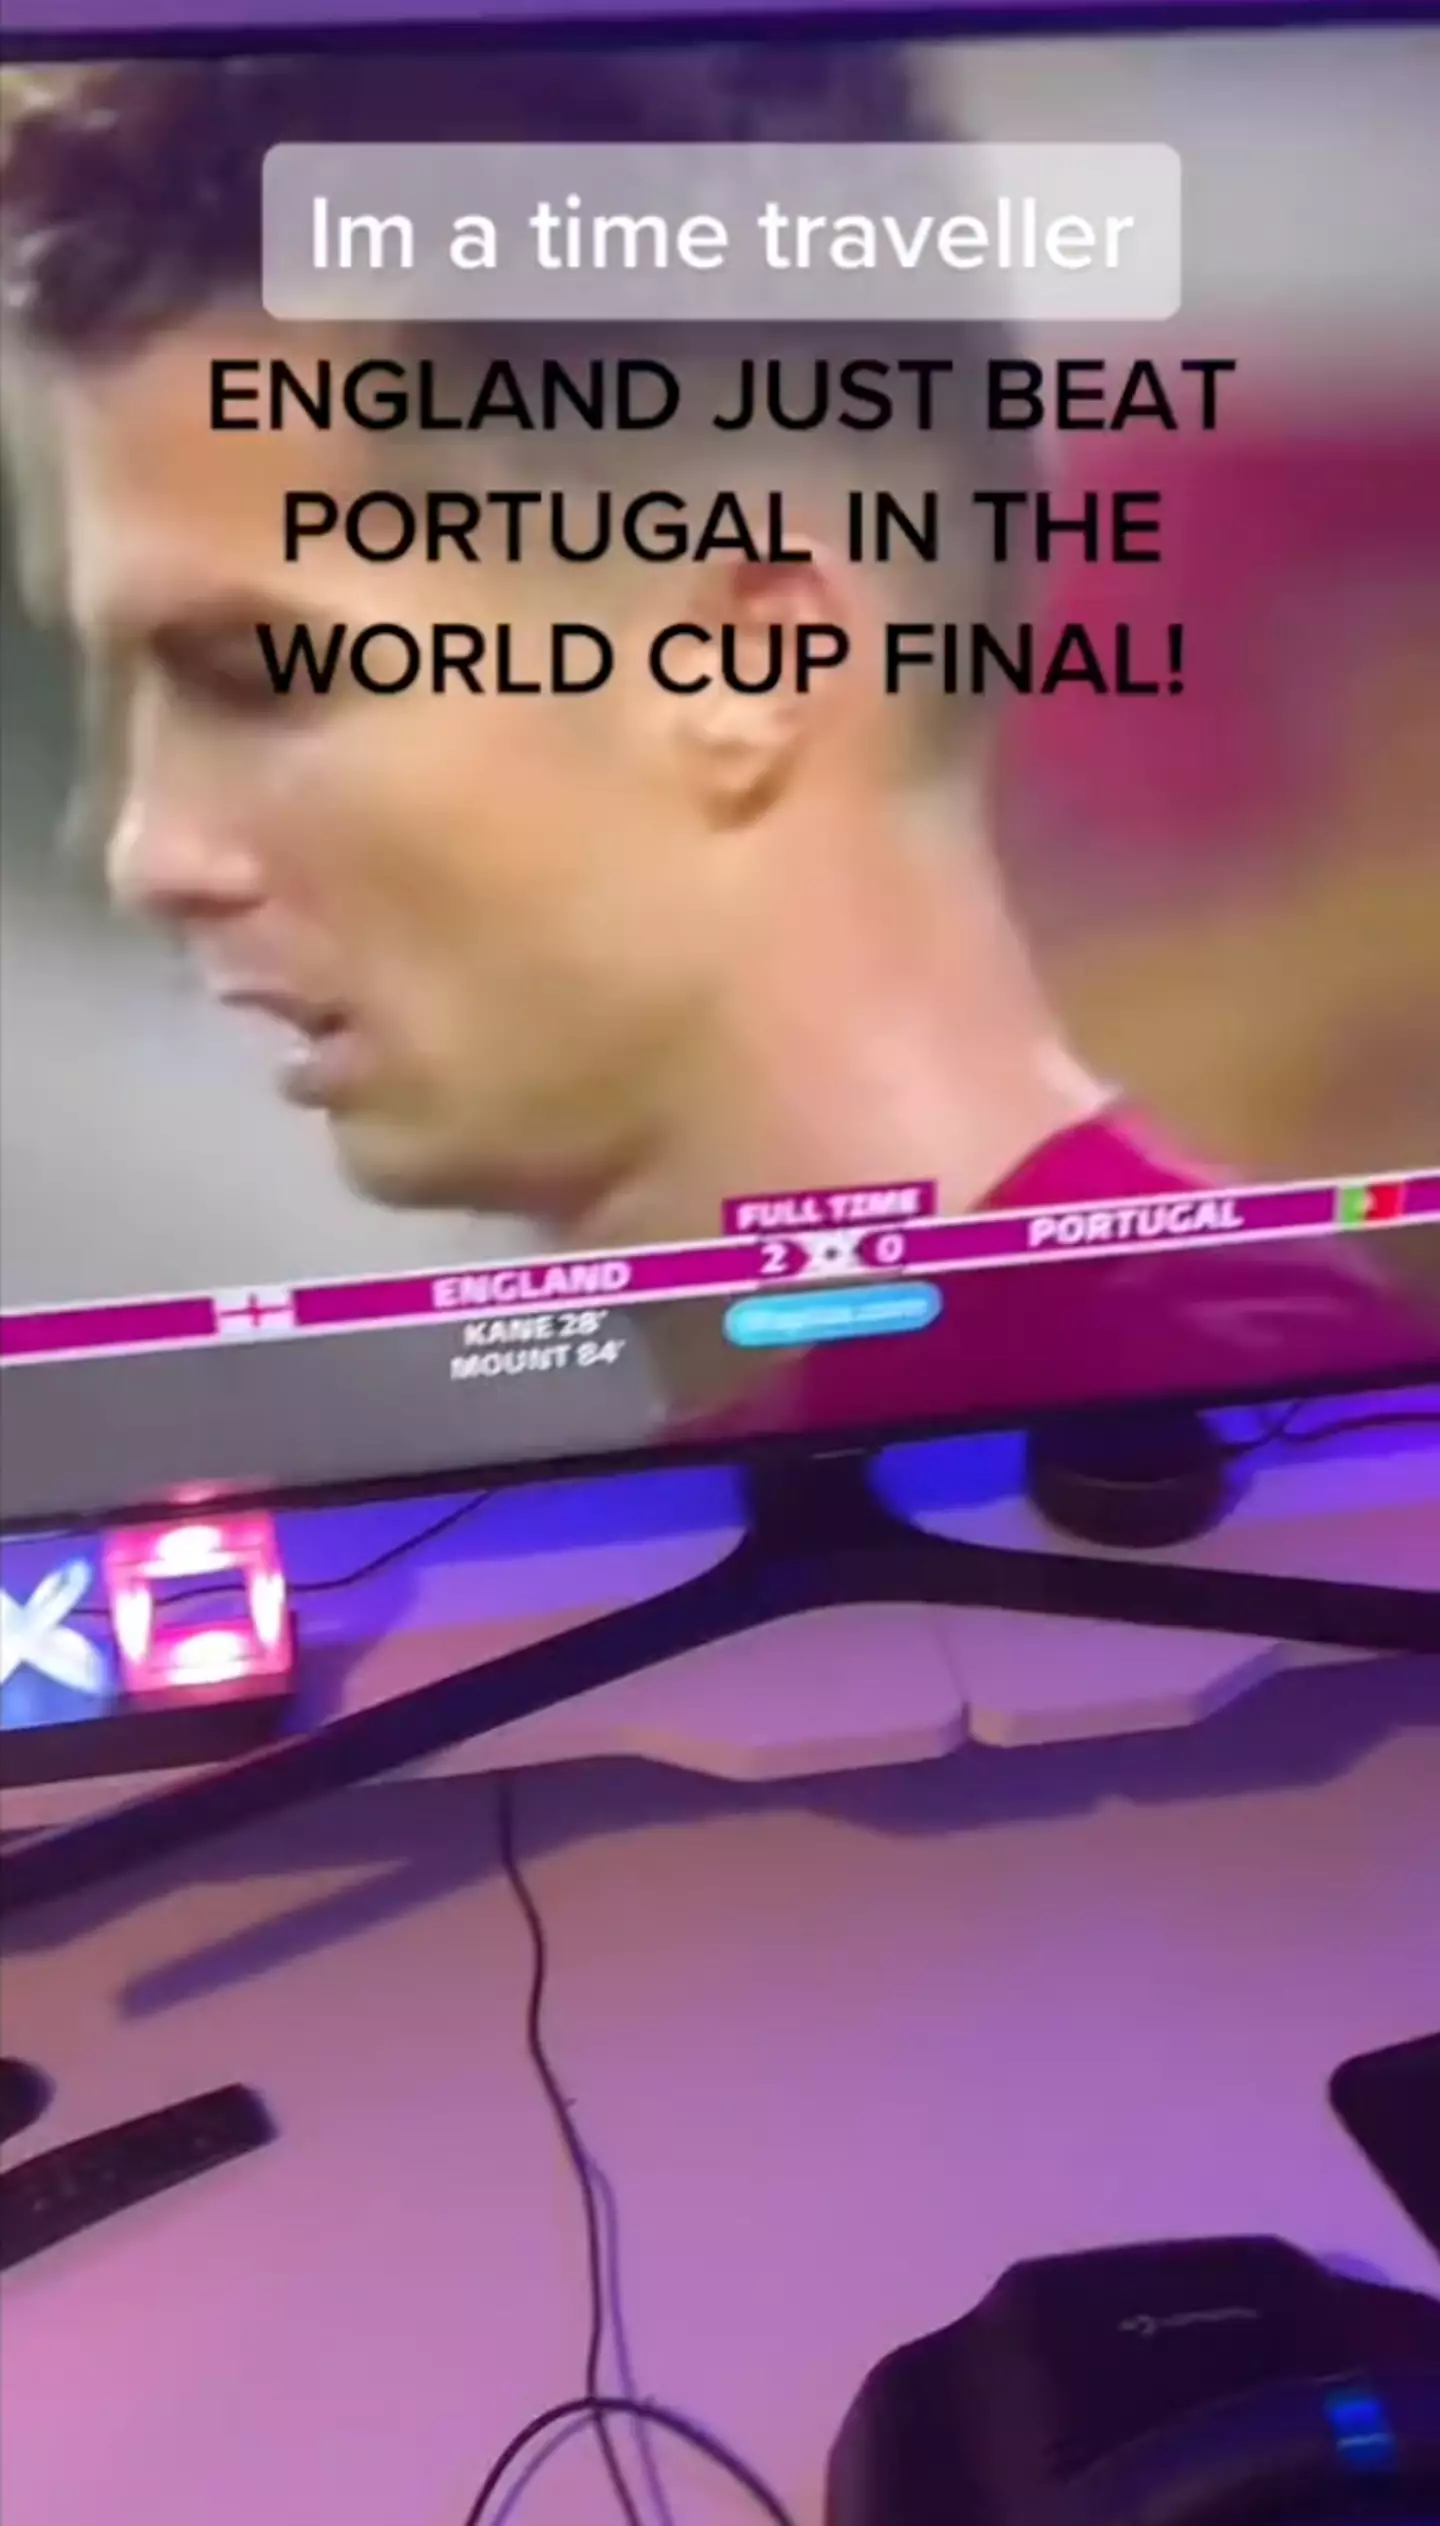 Cristiano Ronaldo will see his Portugal side LOSE to England in the 2022 World Cup, according to this time traveller’s prediction.